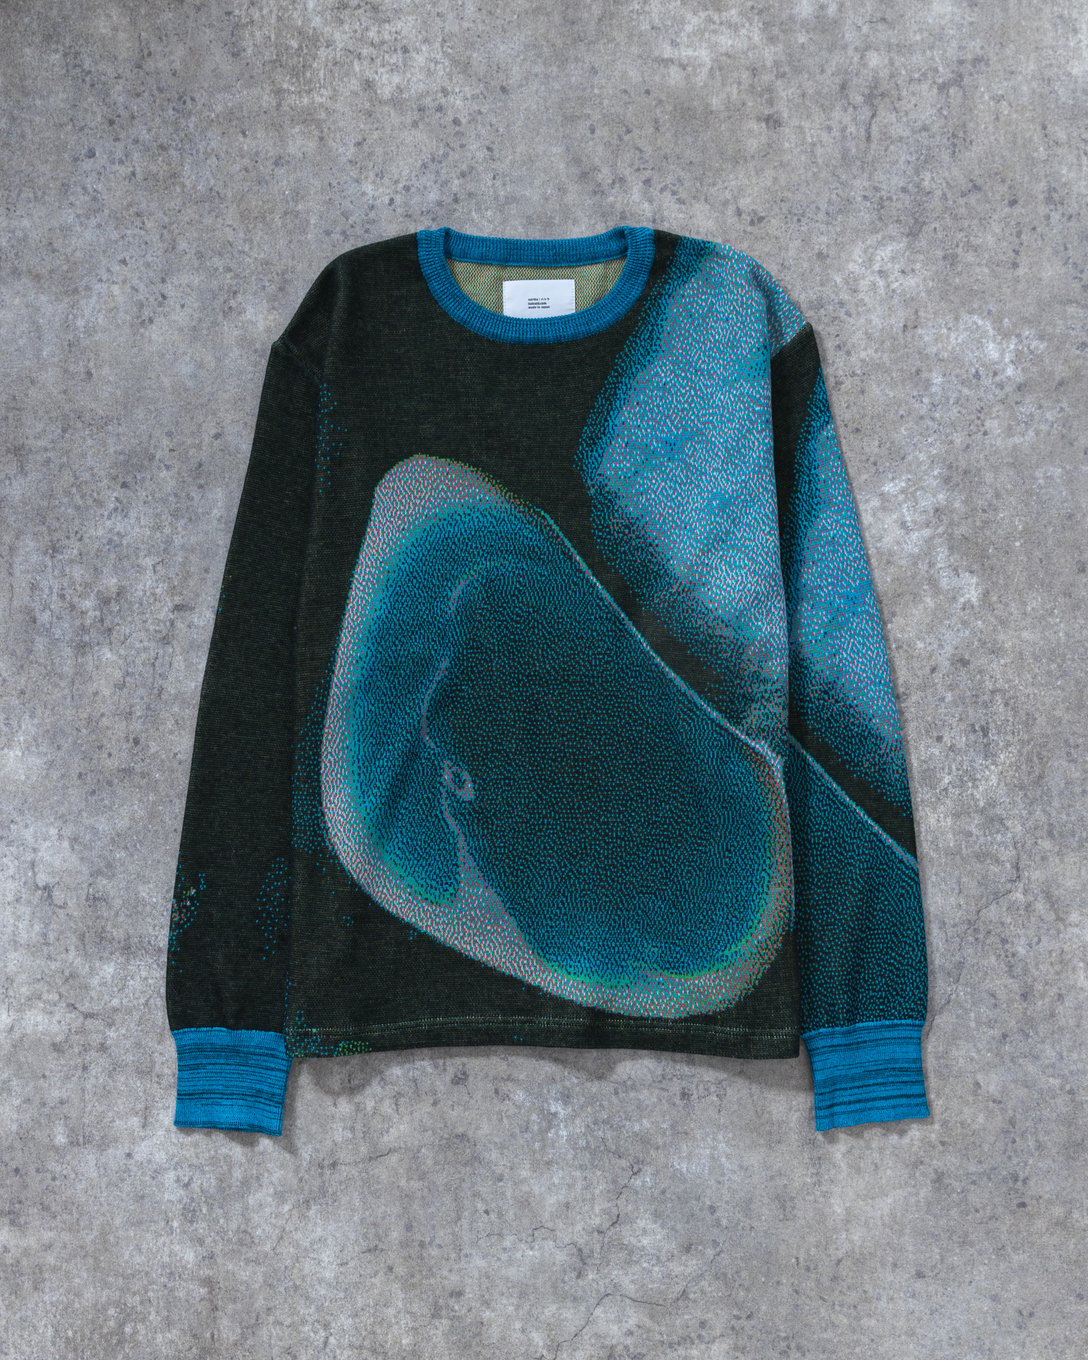 INK SCAPE SWEATER （税込3万9600円） Image by FASHIONSNAP